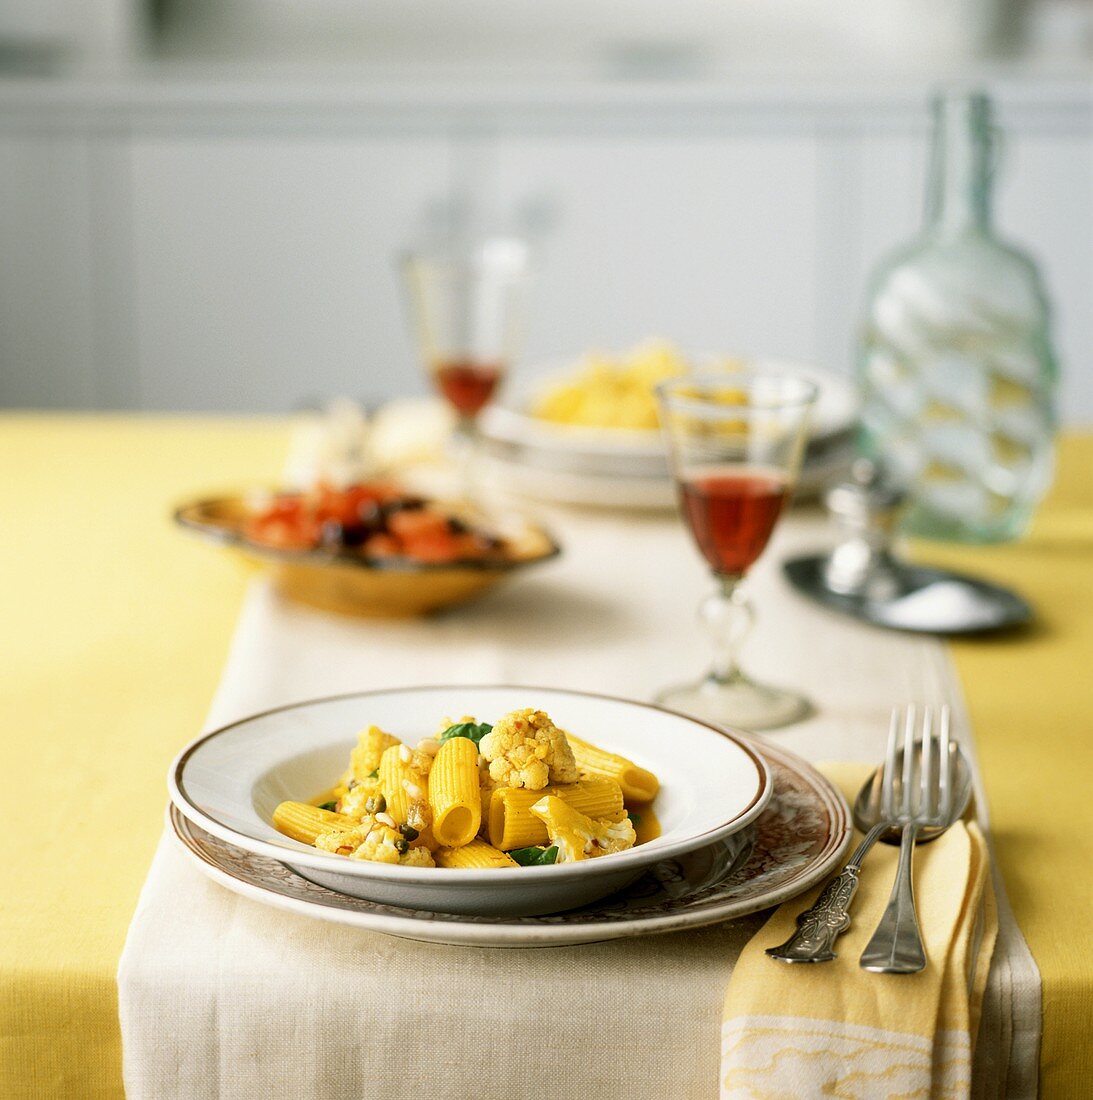 Curried ziti, capers and cauliflower on a laid table